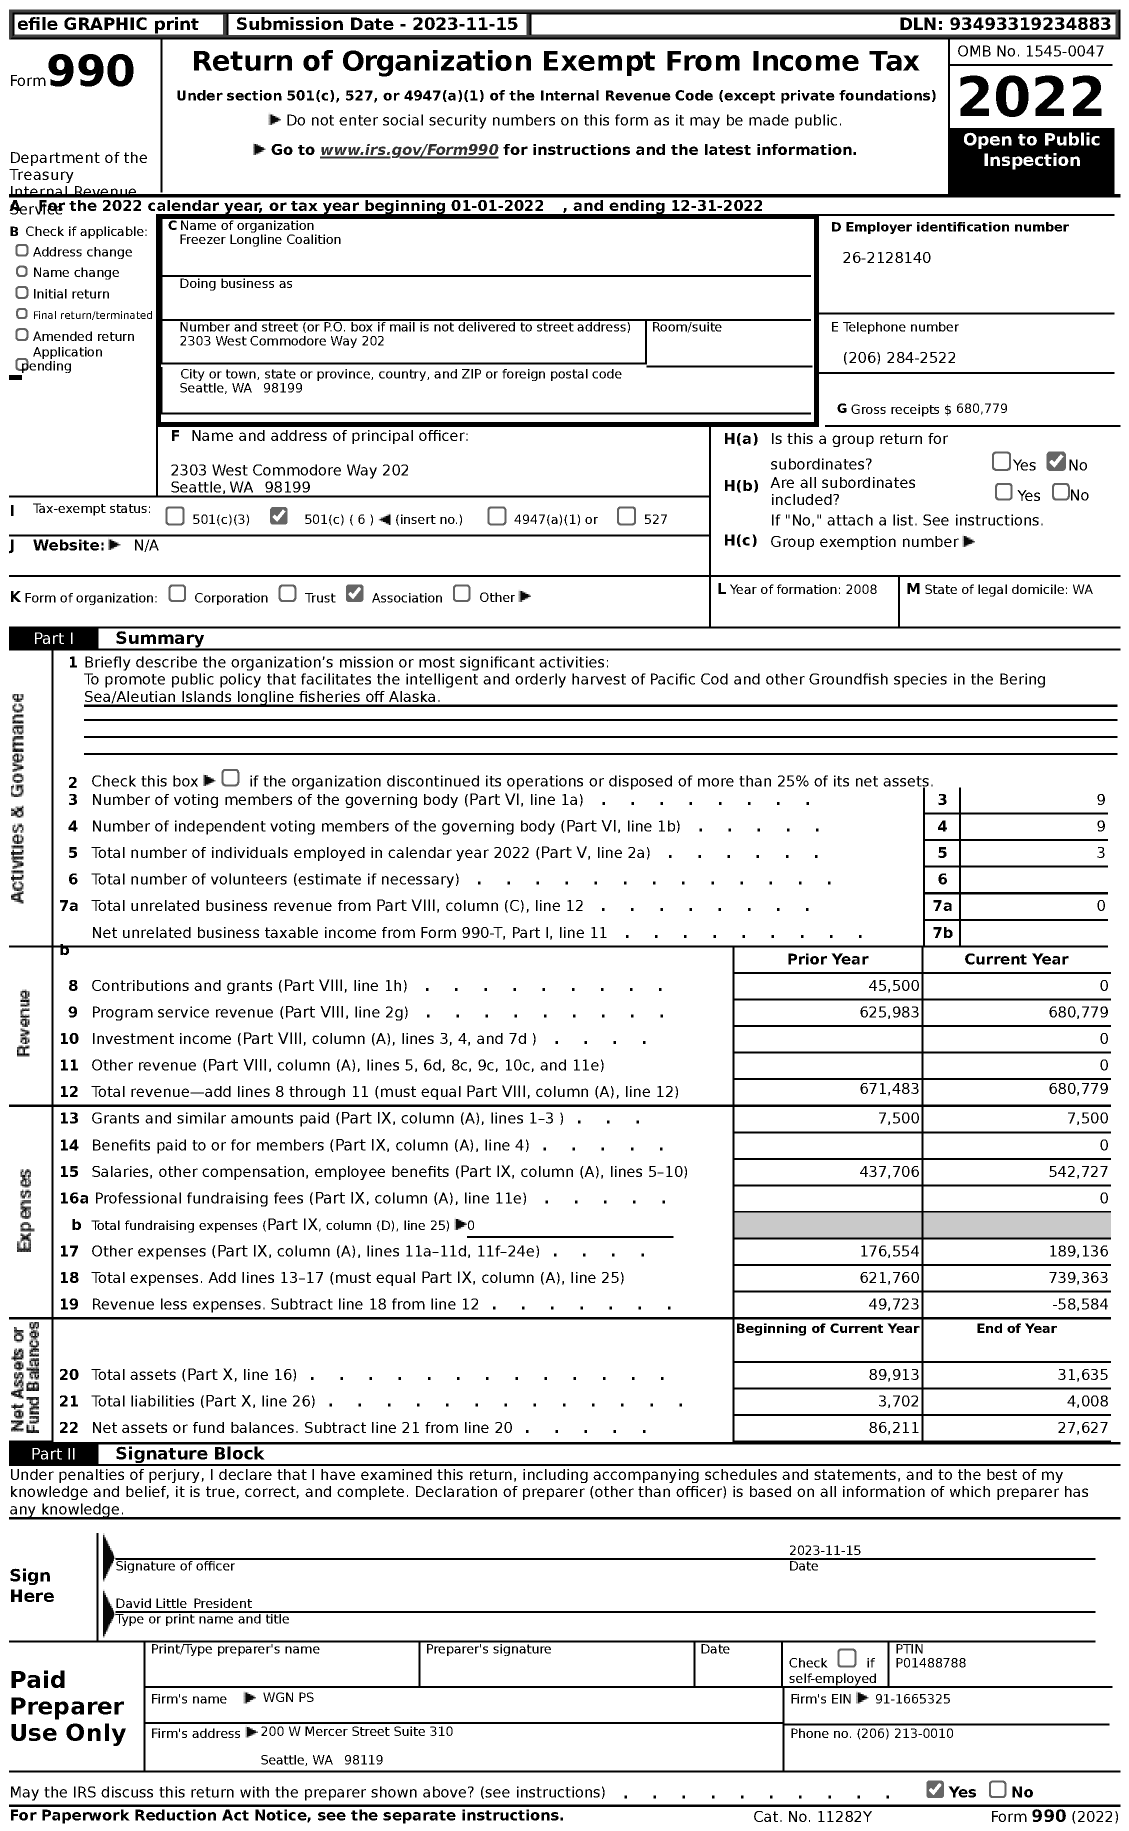 Image of first page of 2022 Form 990 for Freezer Longline Coalition